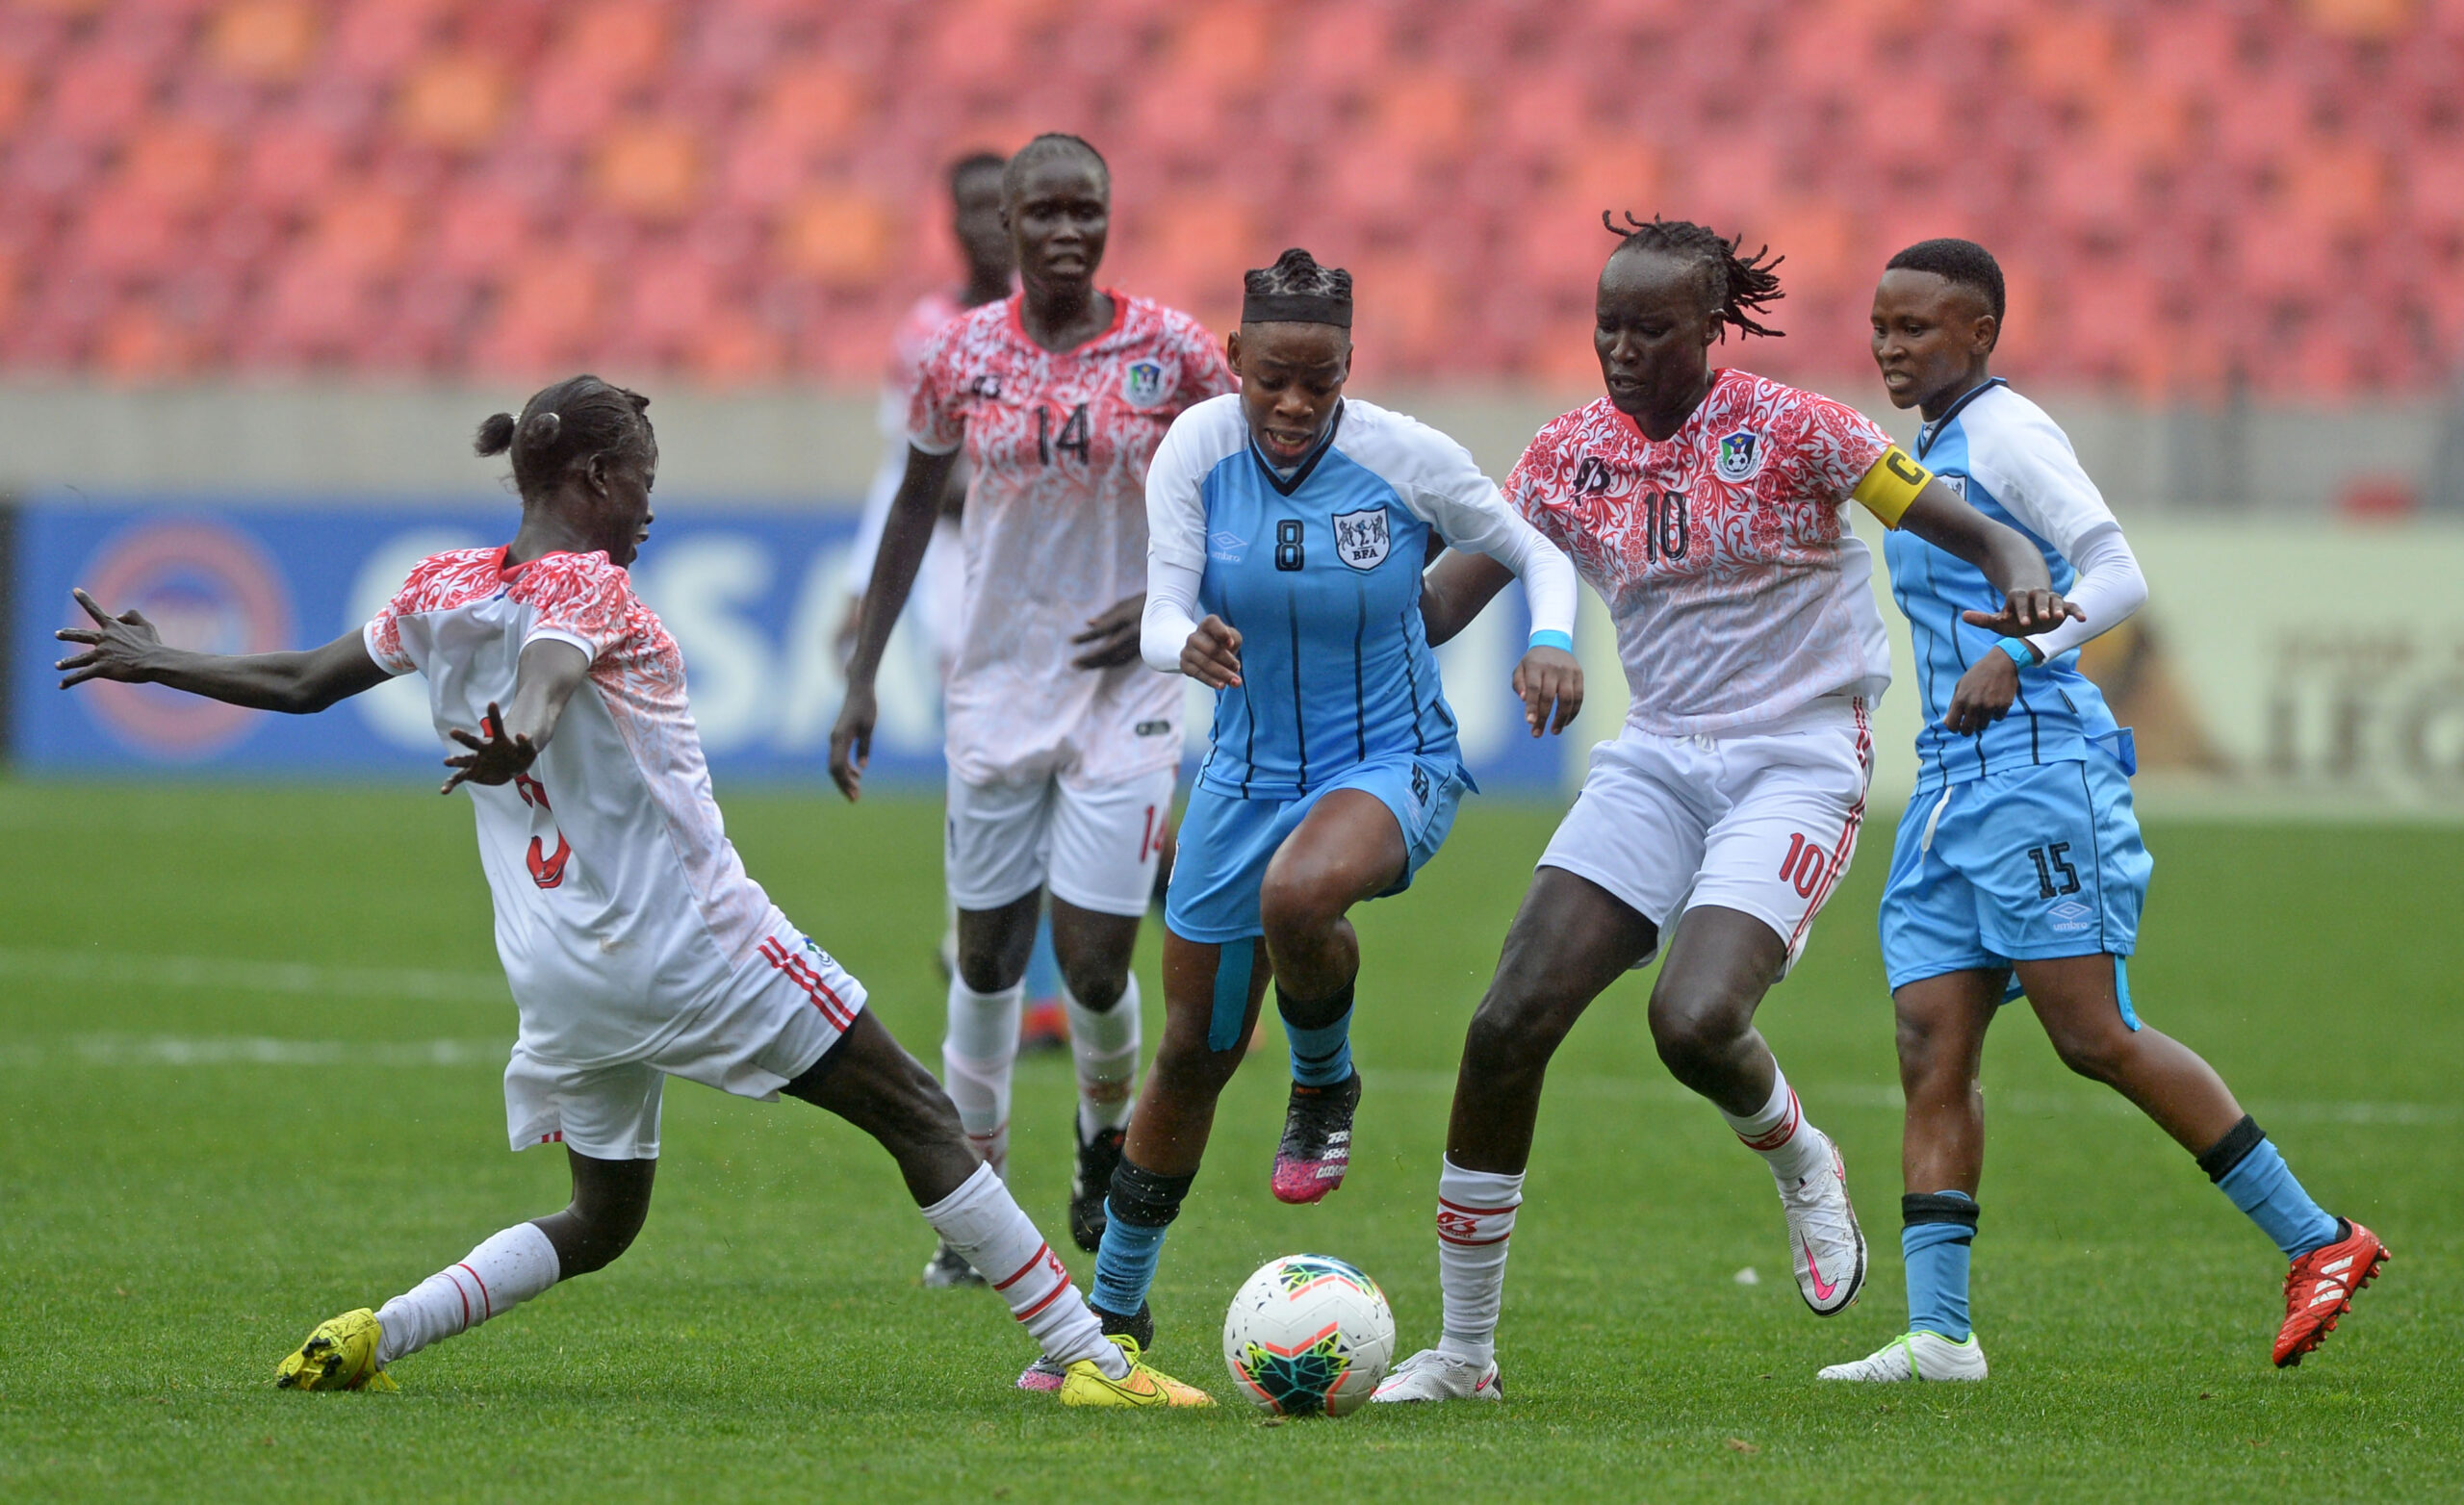 Lone Gaofetoge of Botswana is challenged by Dorka Lokeri Lam and Amy Lasu of South Sudan during the 2021 COSAFA Womens Championship Group B game between Botswana and South Sudan at Nelson Mandela Bay Stadium in Gqeberha on 29 September 2021 ©Ryan Wilkisky/BackpagePix